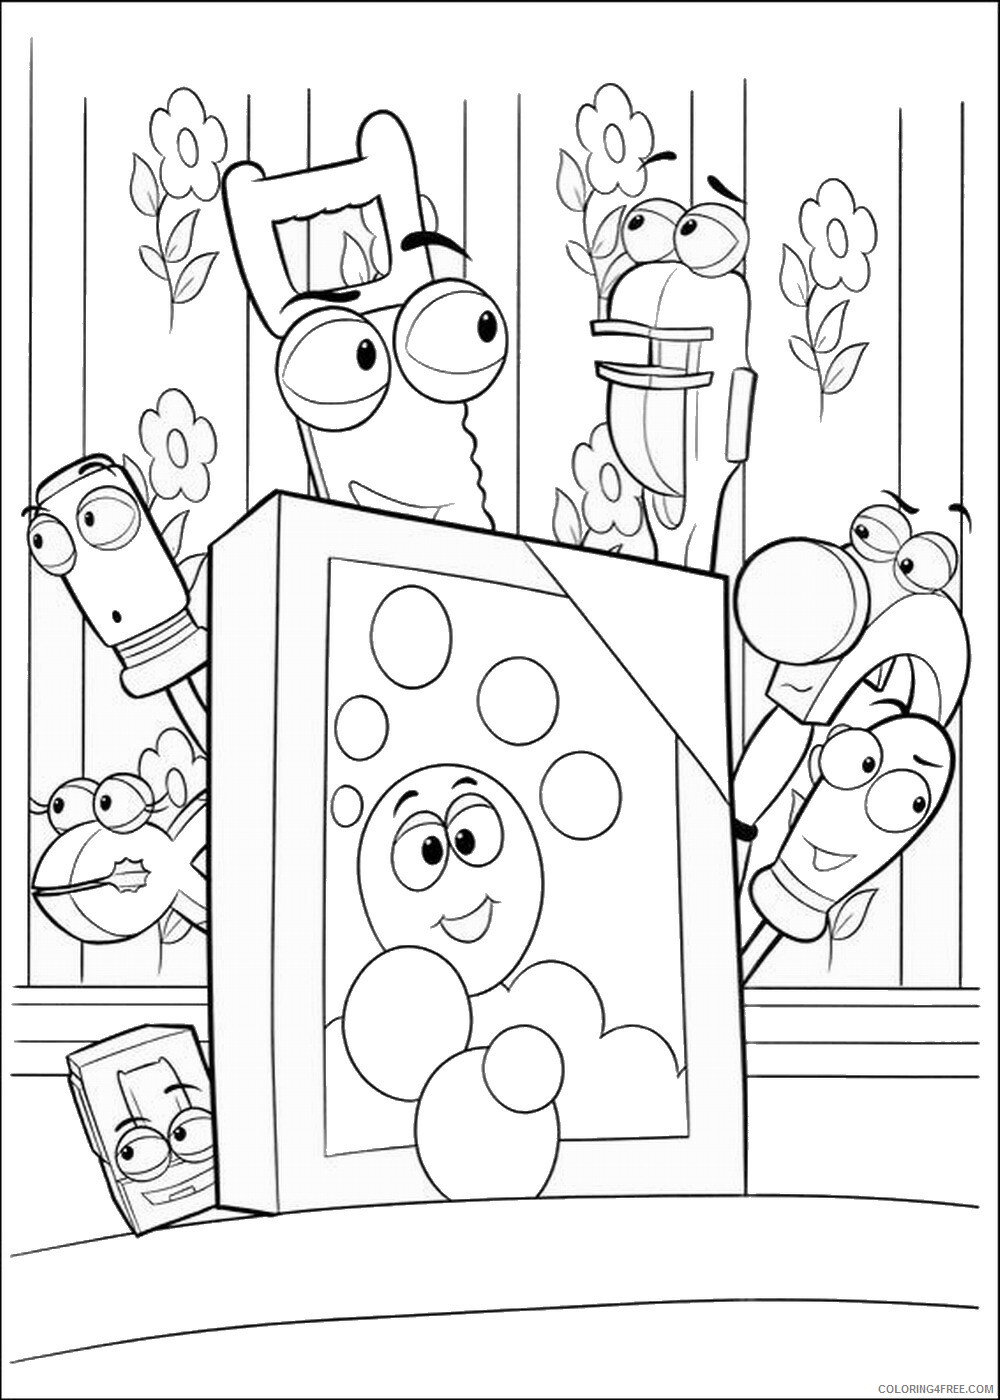 Handy Manny Coloring Pages TV Film handy_manny_coloring17 Printable 2020 03390 Coloring4free